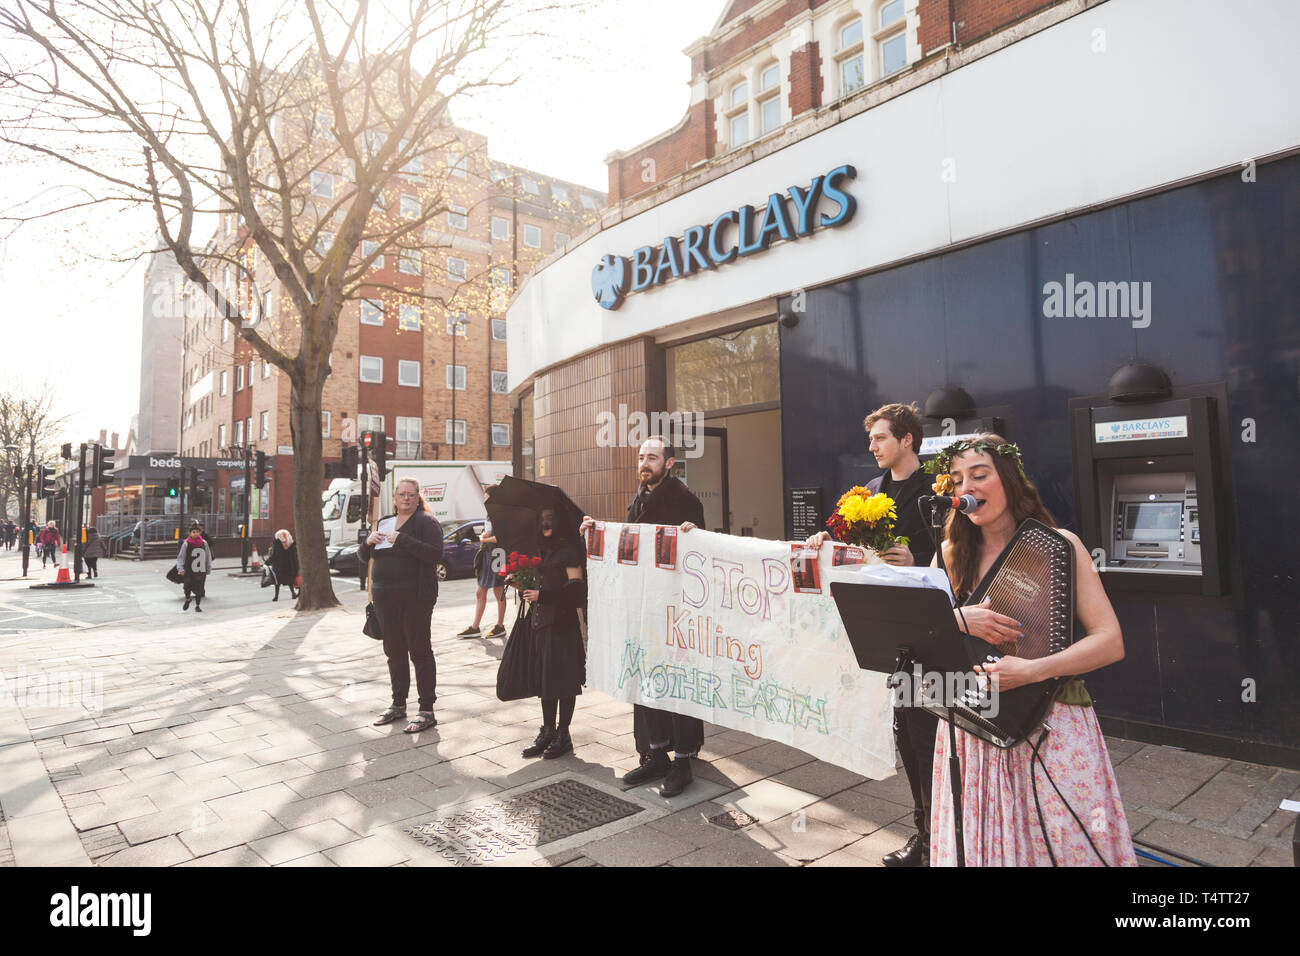 Momentum UK environmentalists target Barclays in fossil fuels campaign Stock Photo